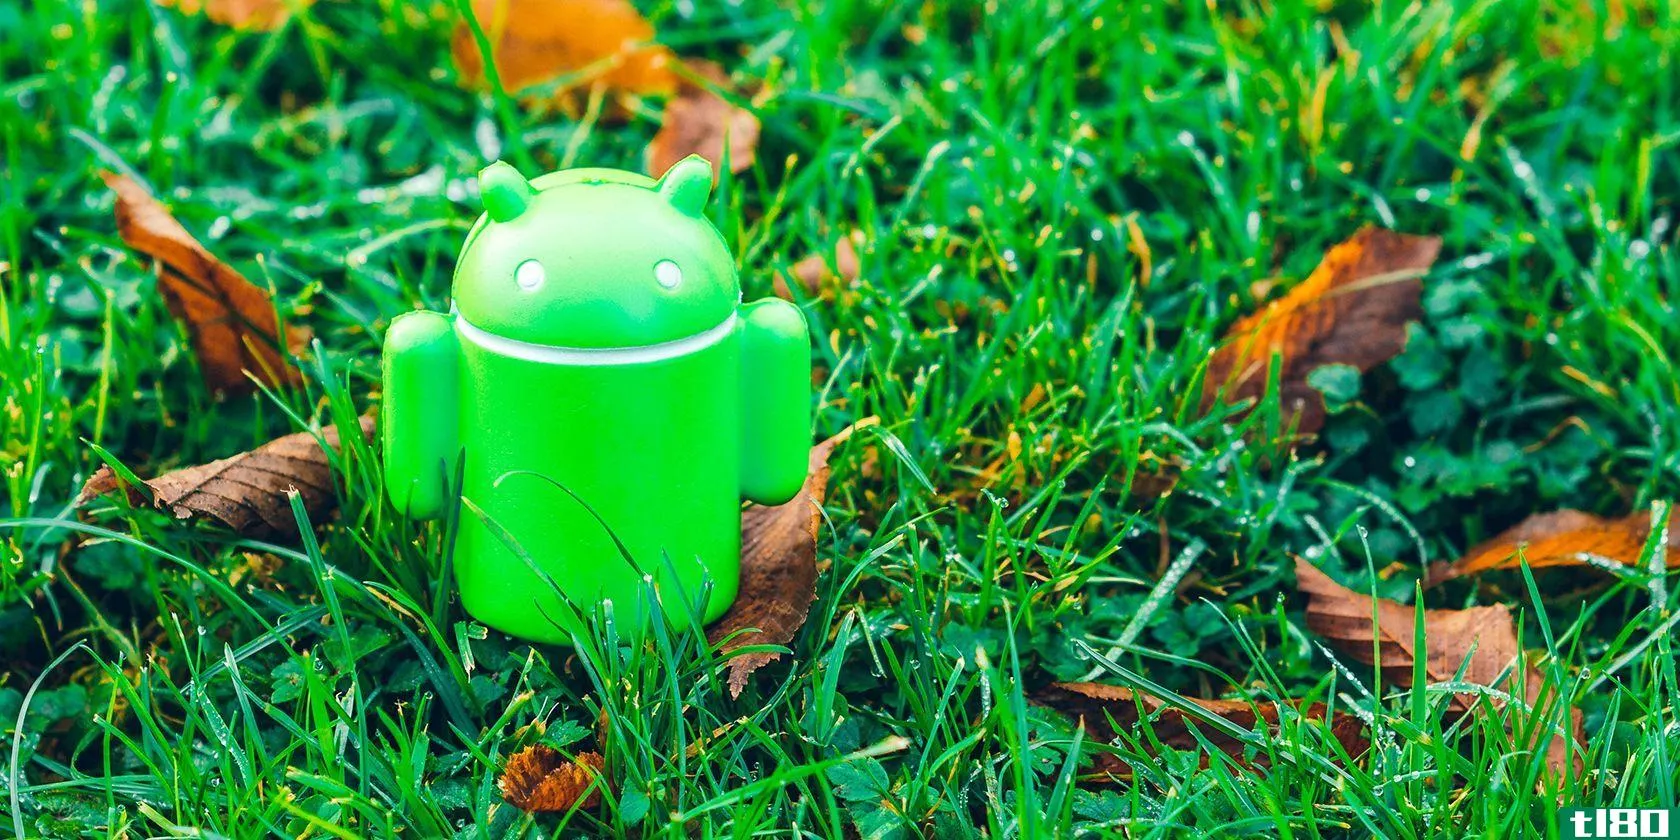 Android bugdroid